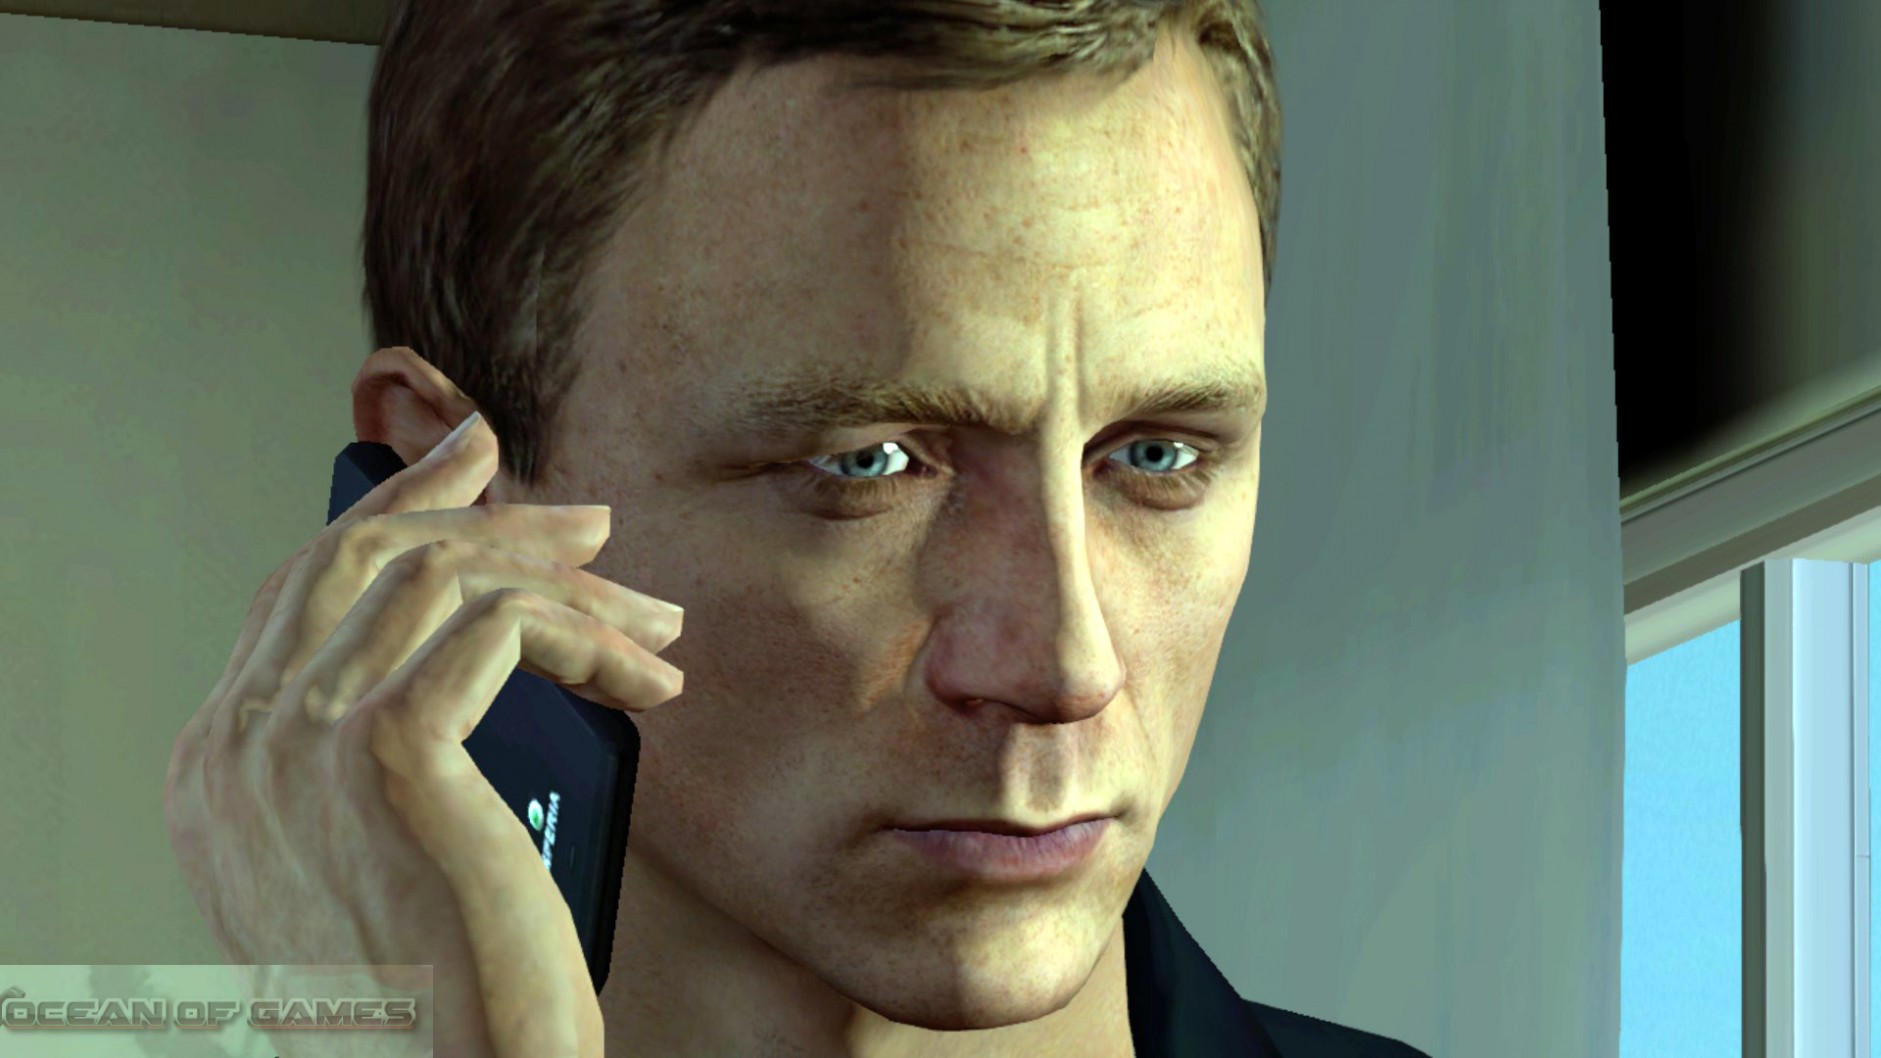 download 007 on ps5